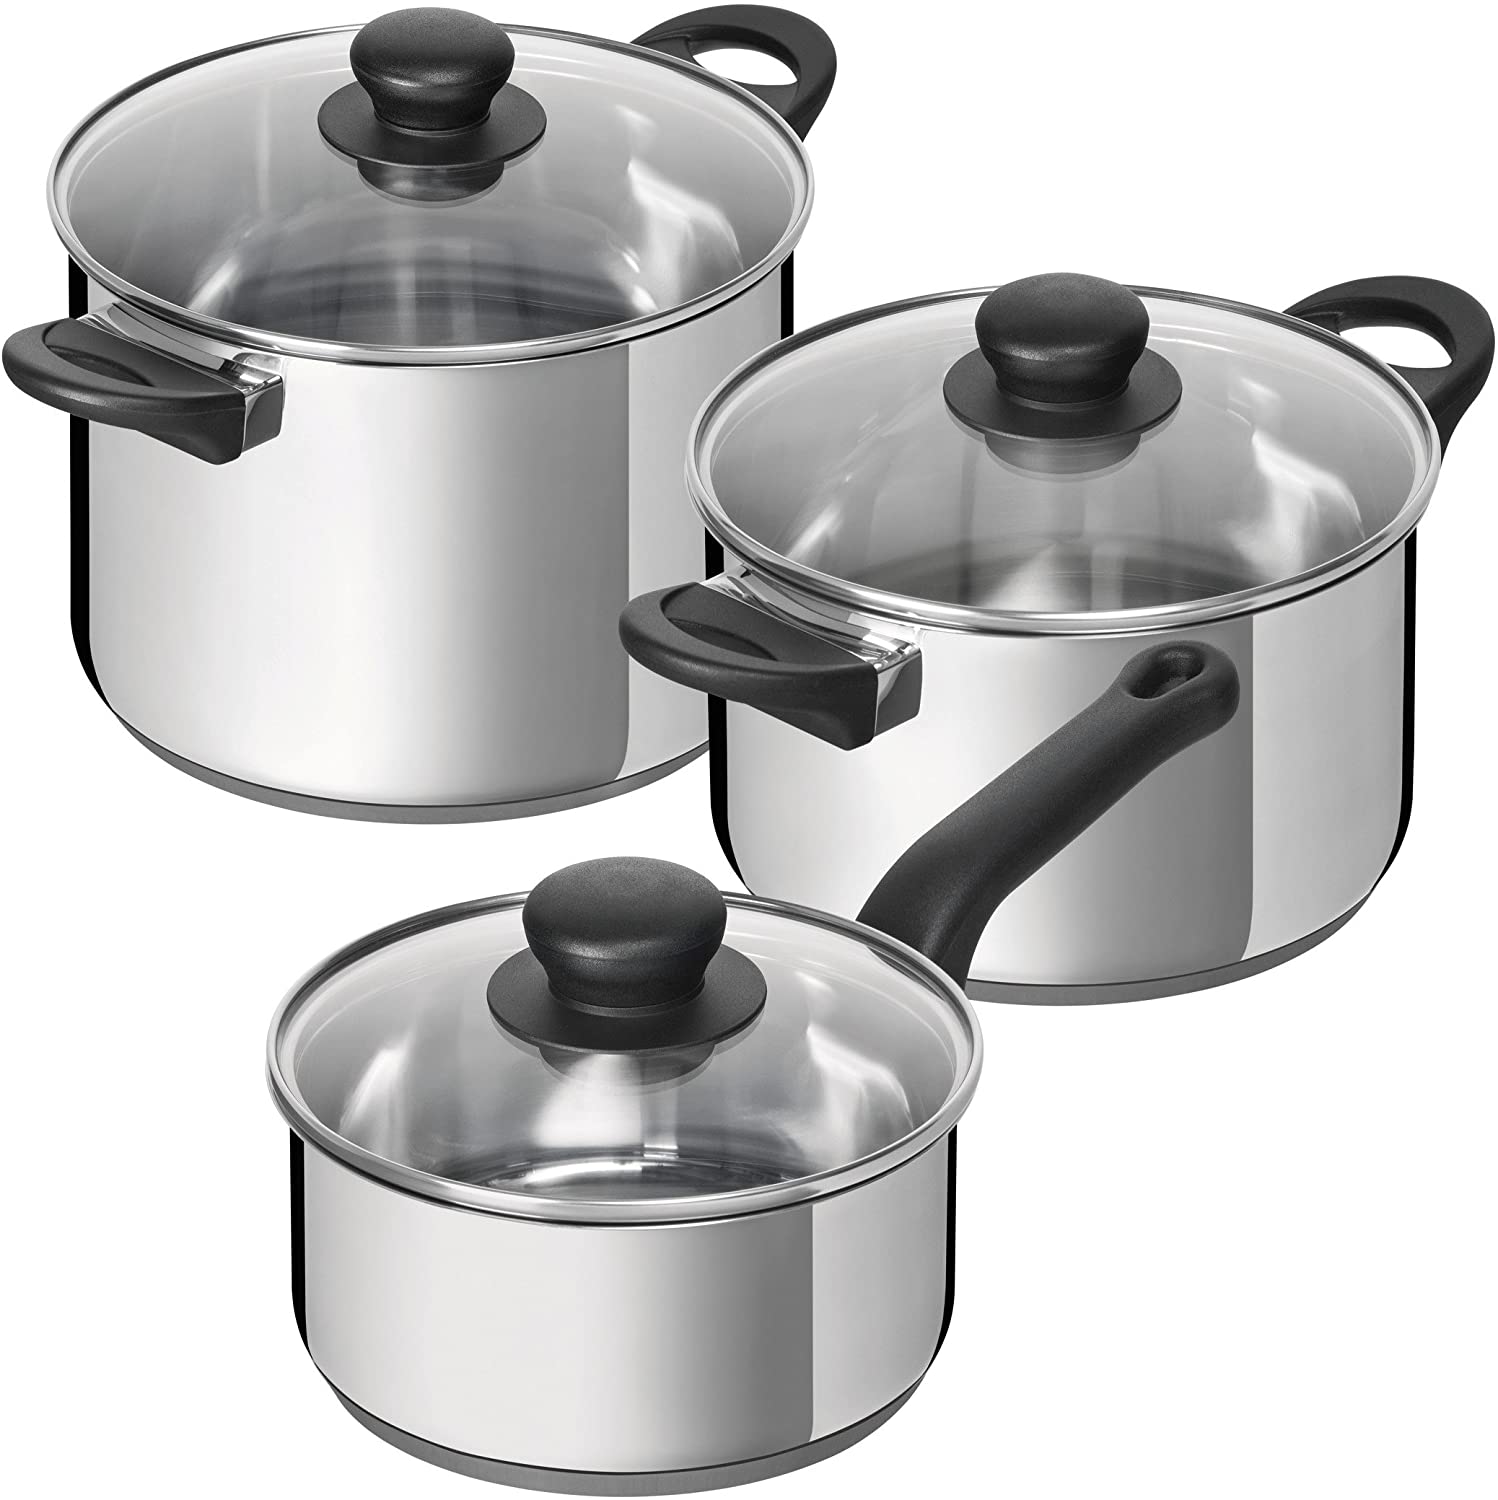 Kuhn Rikon 37420 Cookware Set – Stainless Steel, Silver, 64.5 x 34.5 x 26 cm